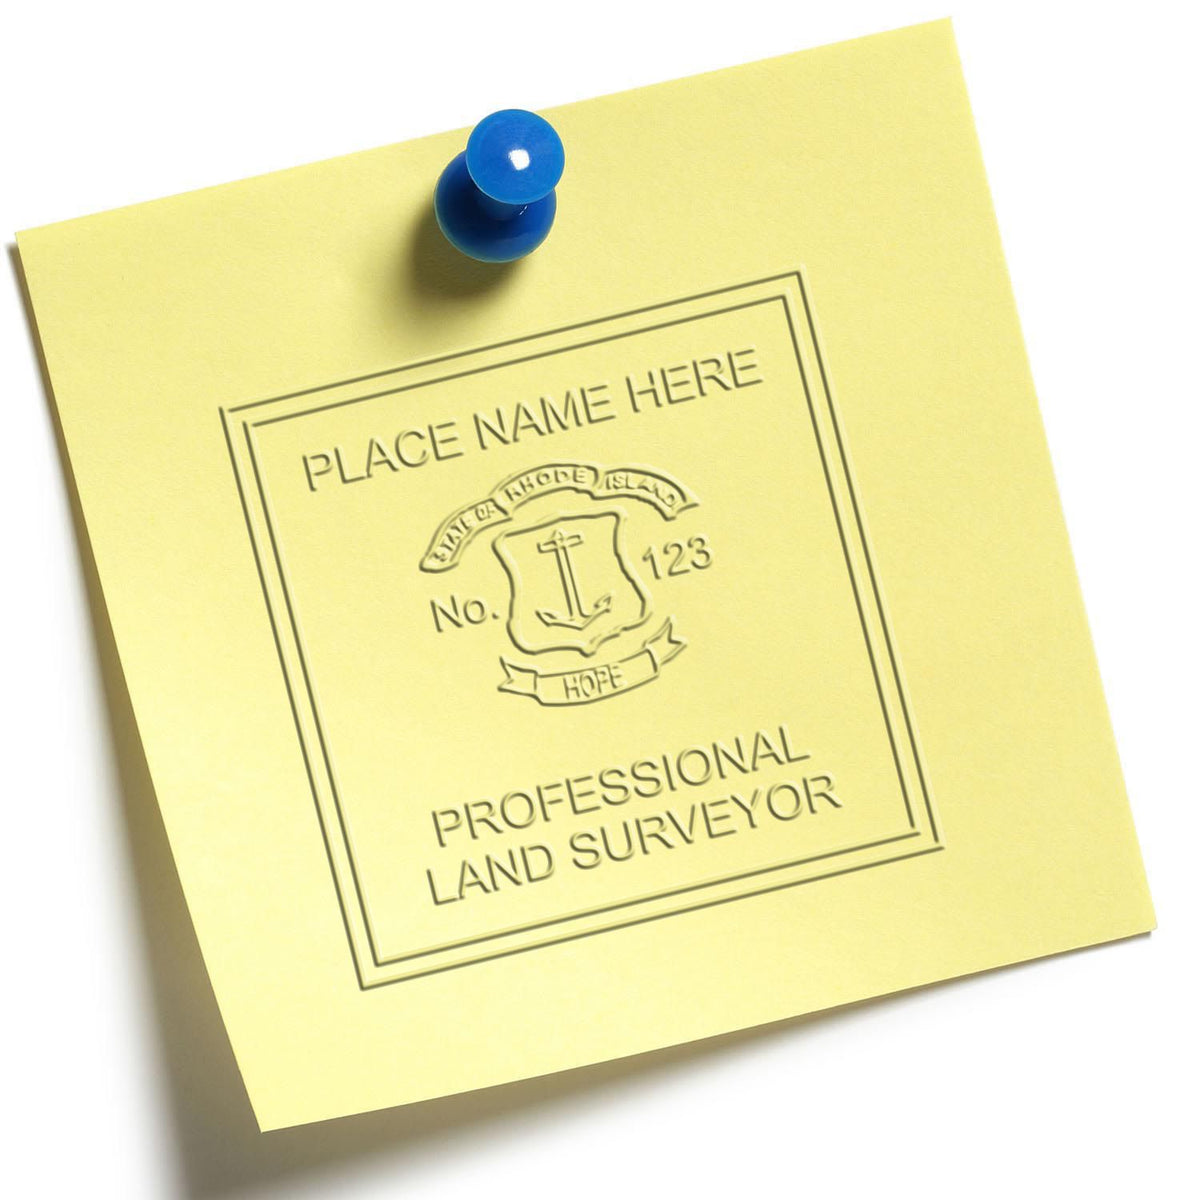 Another Example of a stamped impression of the State of Rhode Island Soft Land Surveyor Embossing Seal on a piece of office paper.